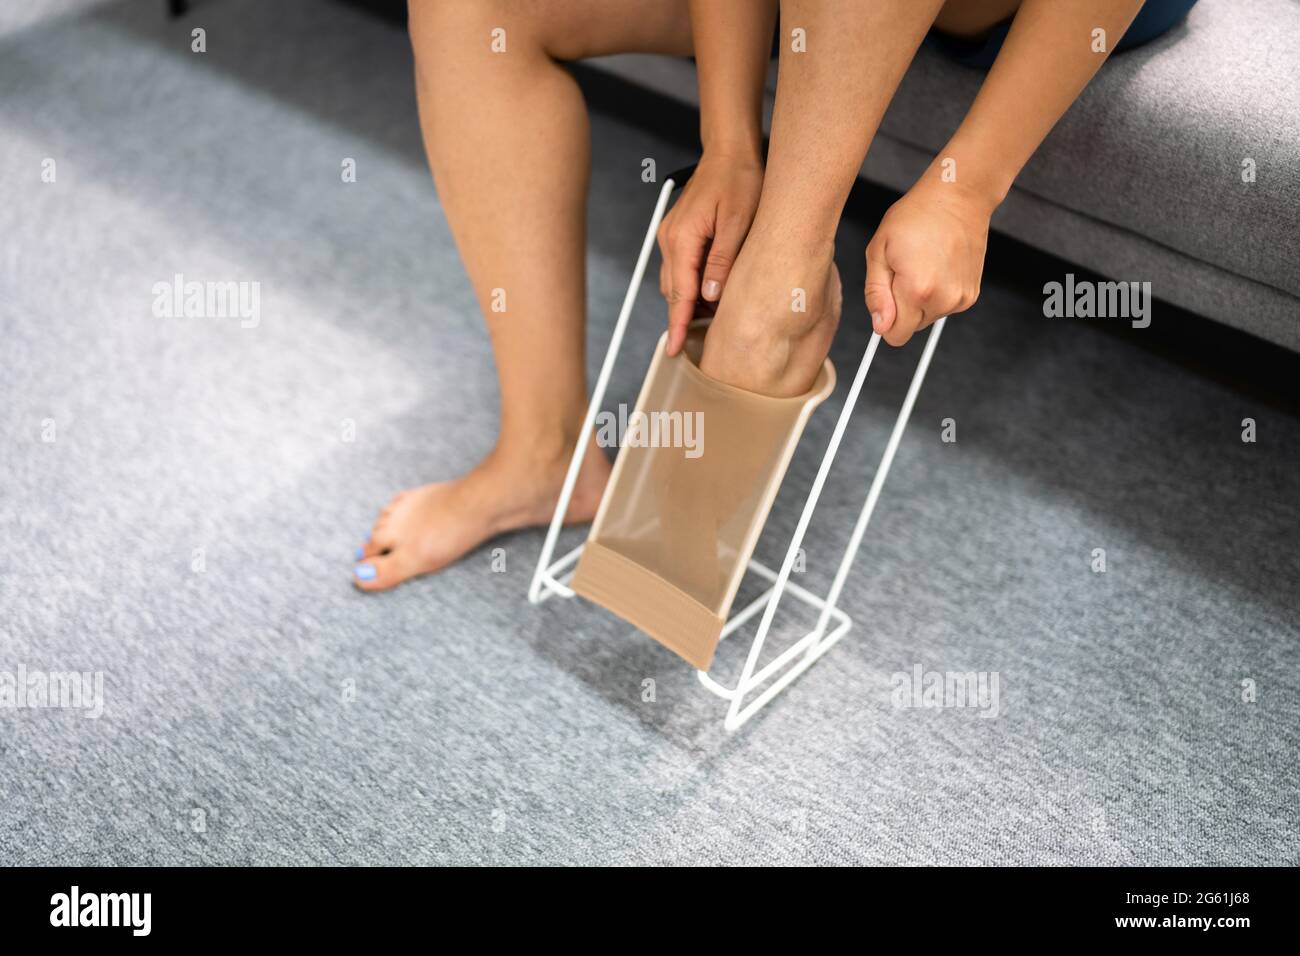 Woman Putting On Medical Compression Stockings Using Stocking Aid Puller Stock Photo